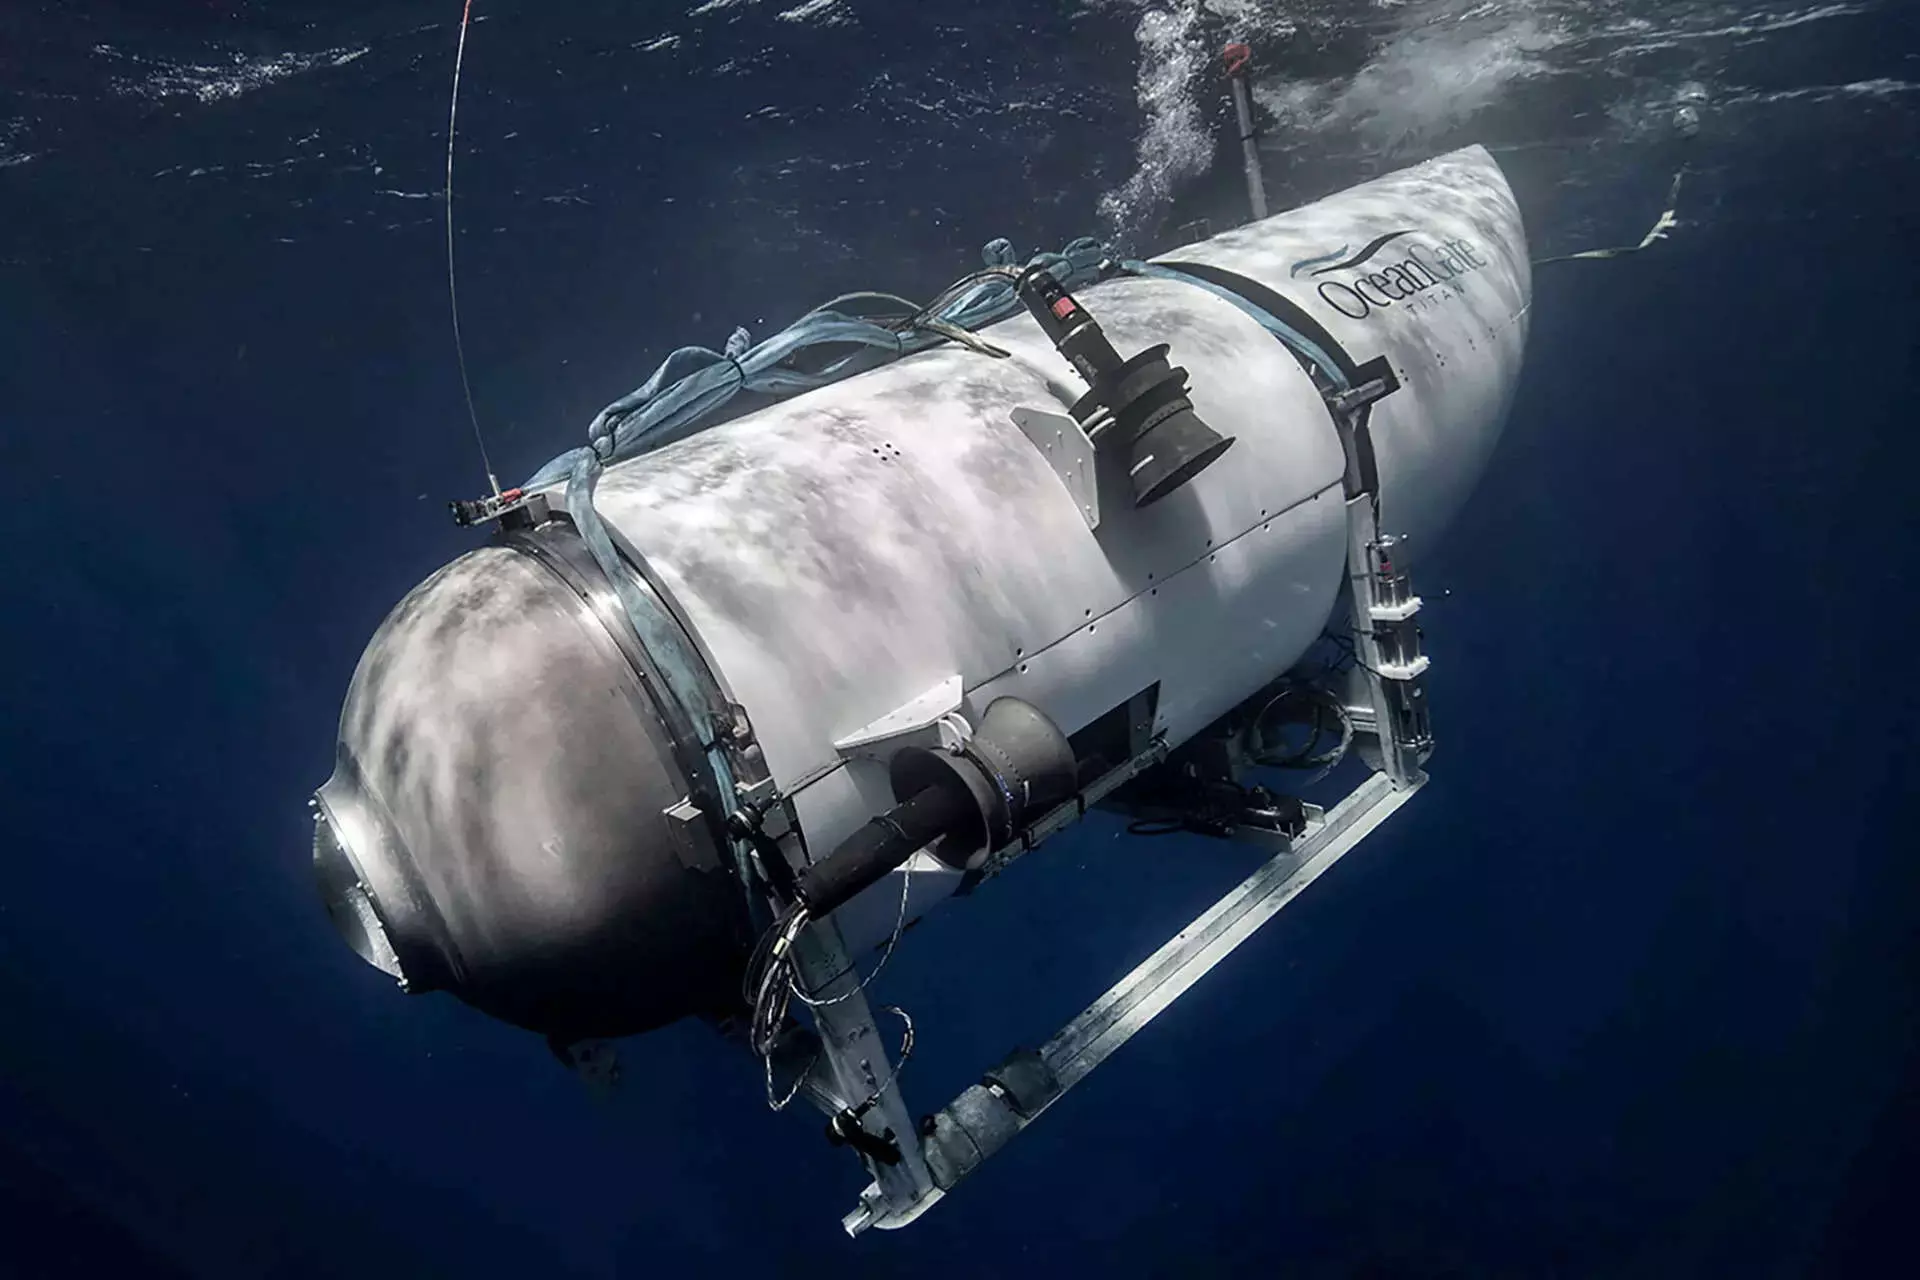 Missing Titan submersible: crew dead after ‘catastrophic implosion’